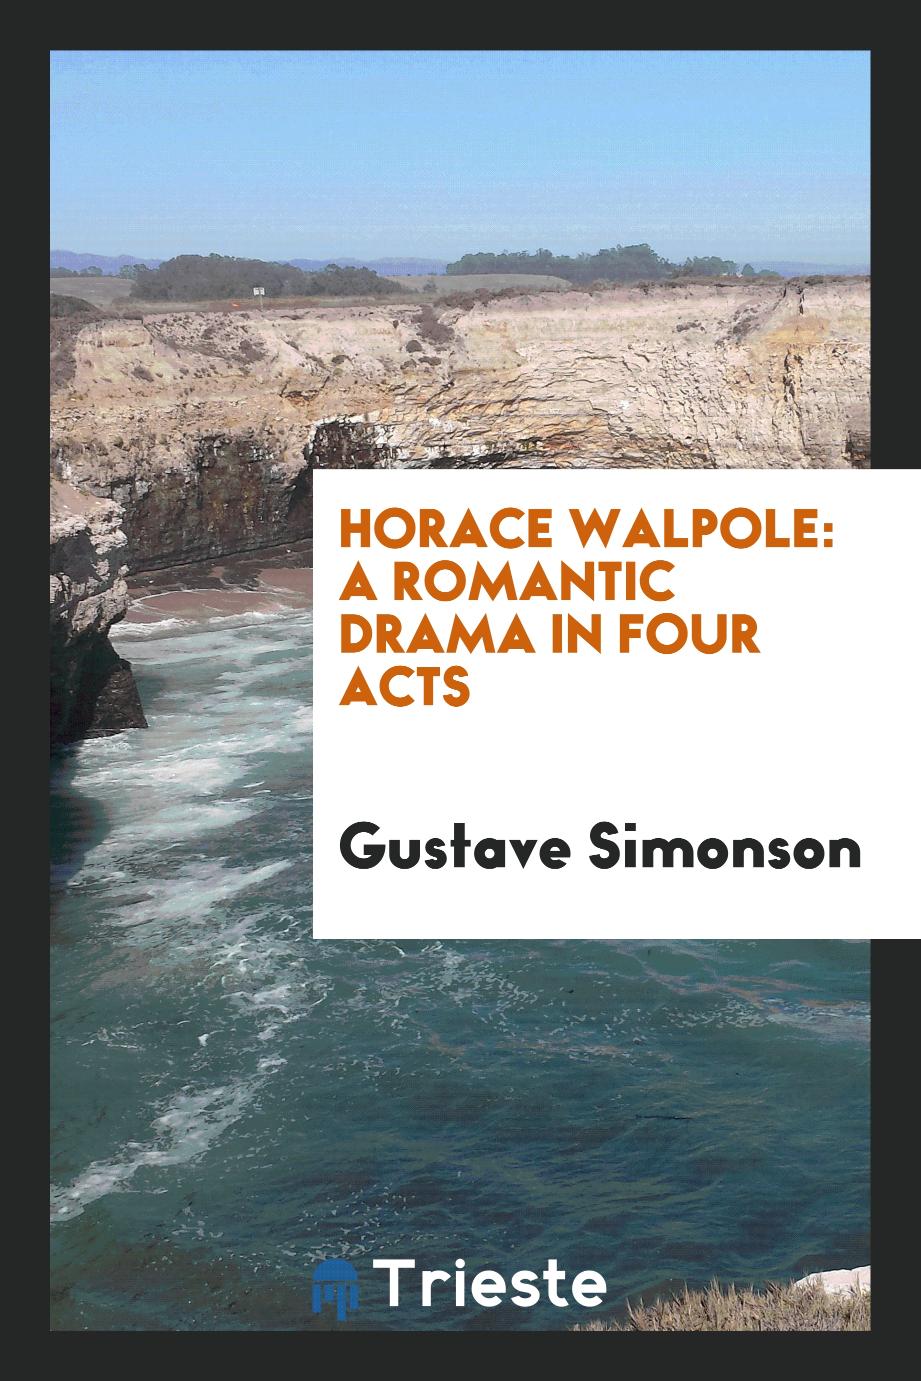 Horace Walpole: A Romantic Drama in Four Acts